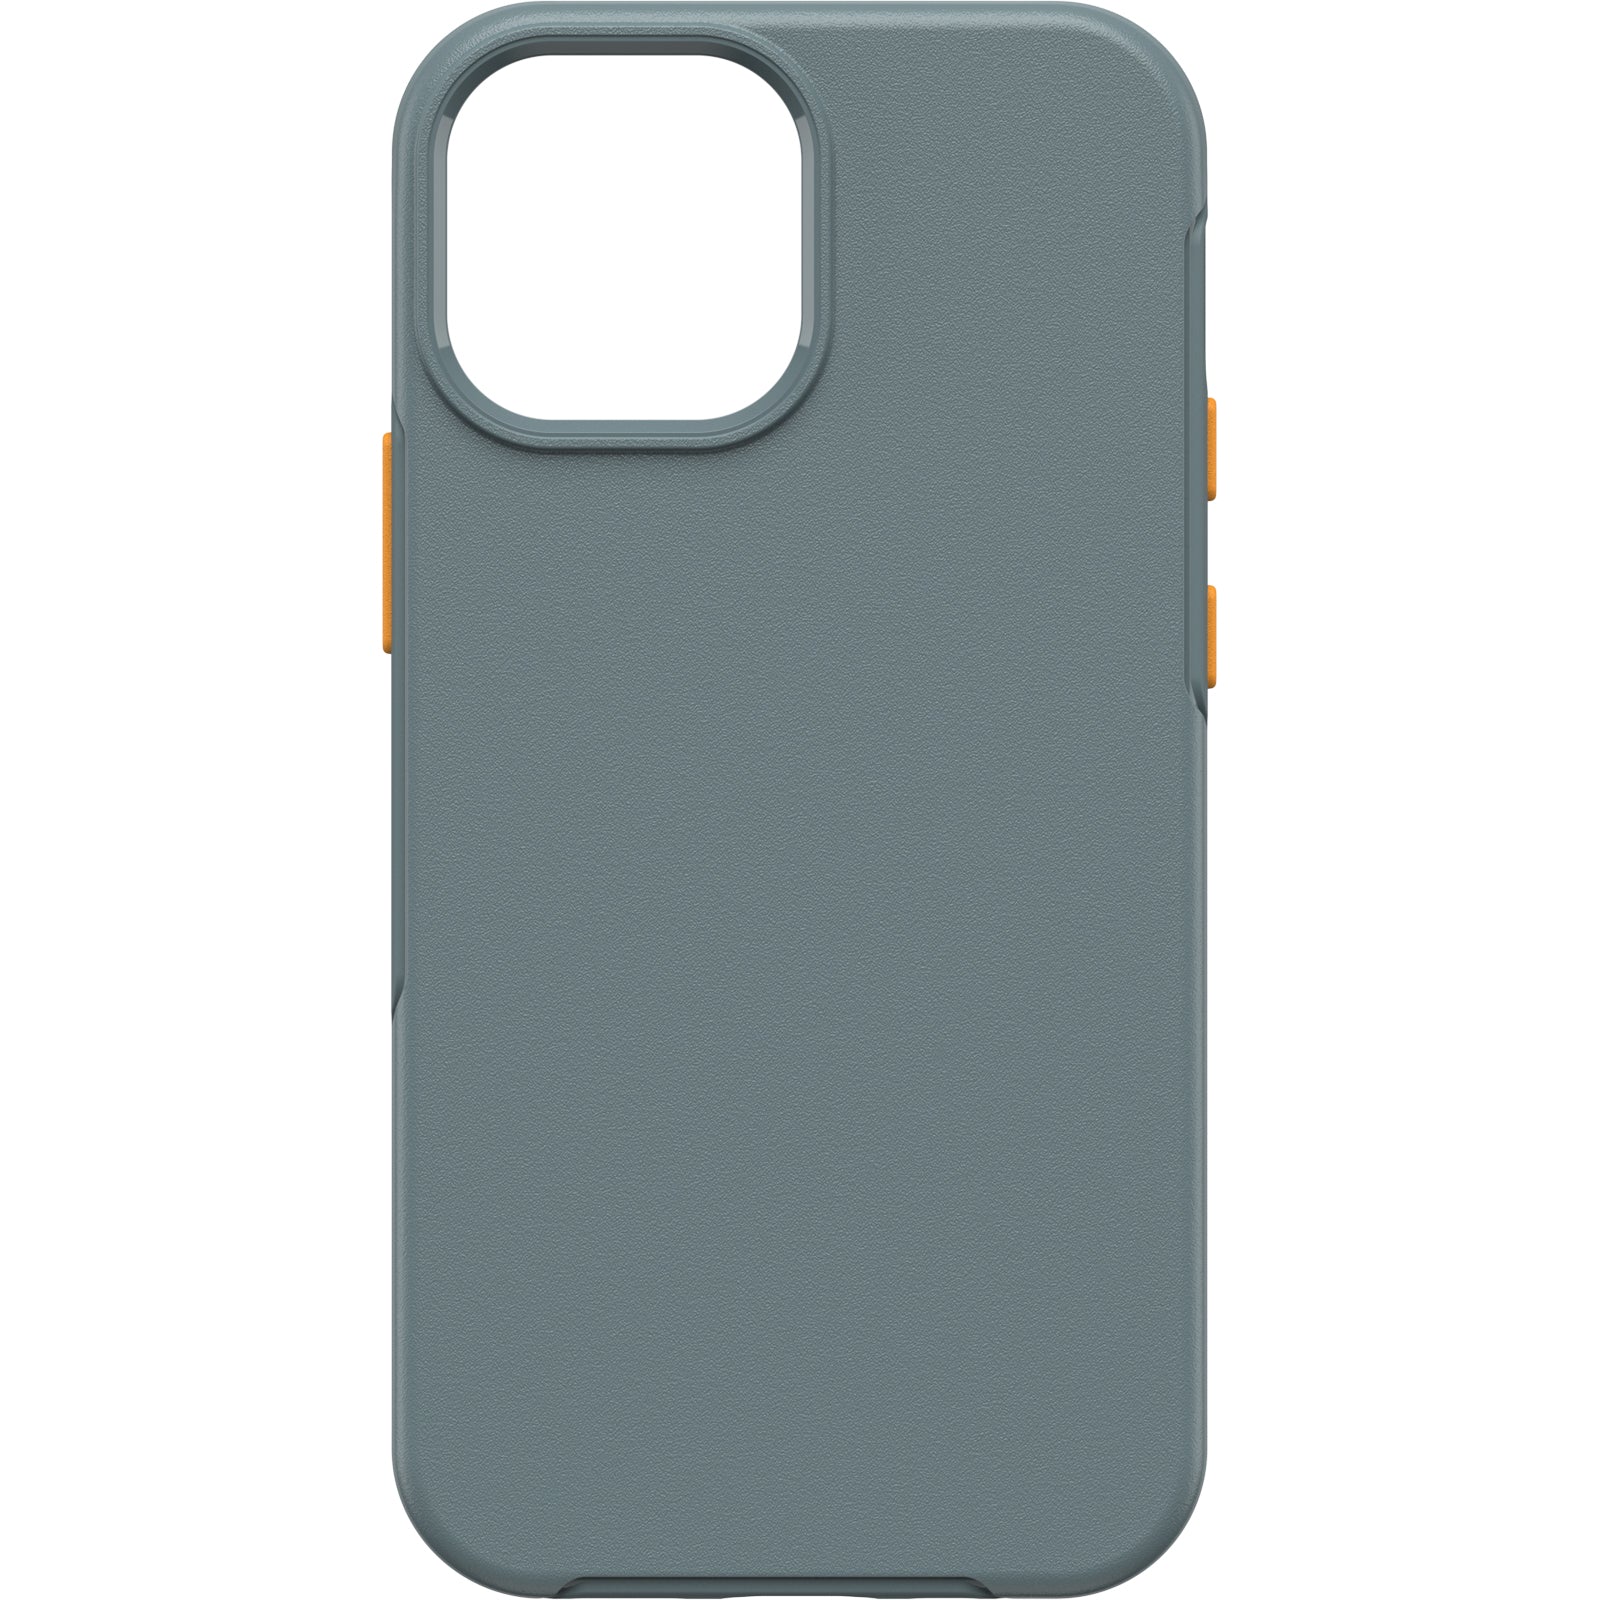 OTTERBOX SEE Case with Magsafe for iPhone 13 Mini (77-83703)- Anchors Away (Grey/orange) - DropProof